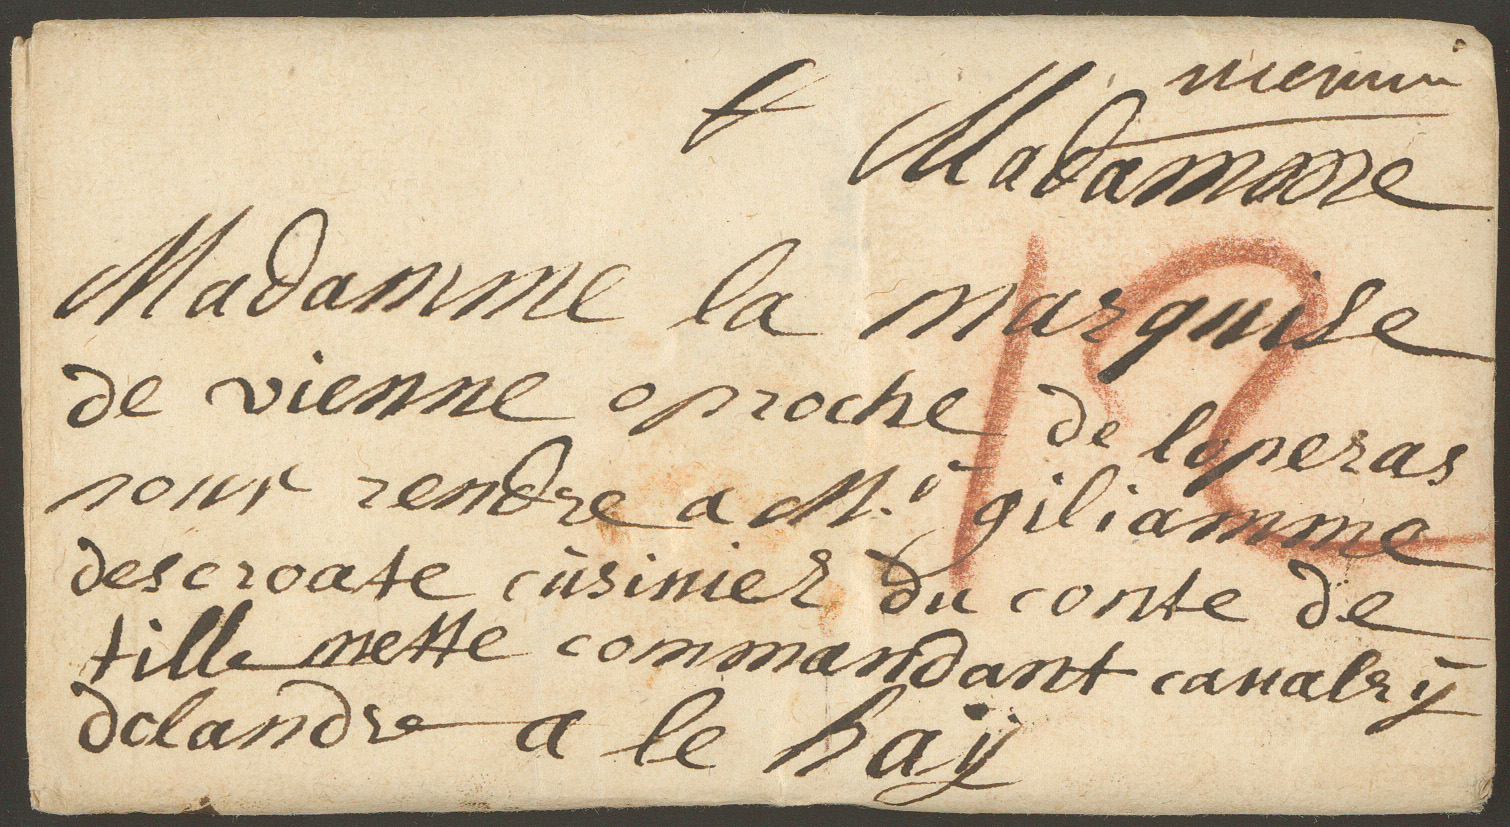 Unopened letter sent to the marquise De Vienne in The Hague, to be handed to Gilliaume Descrote, cook to the count De Tillemette. (Museum voor Communicatie [MvC], The Hague; Brienne Collection, DB-0689)